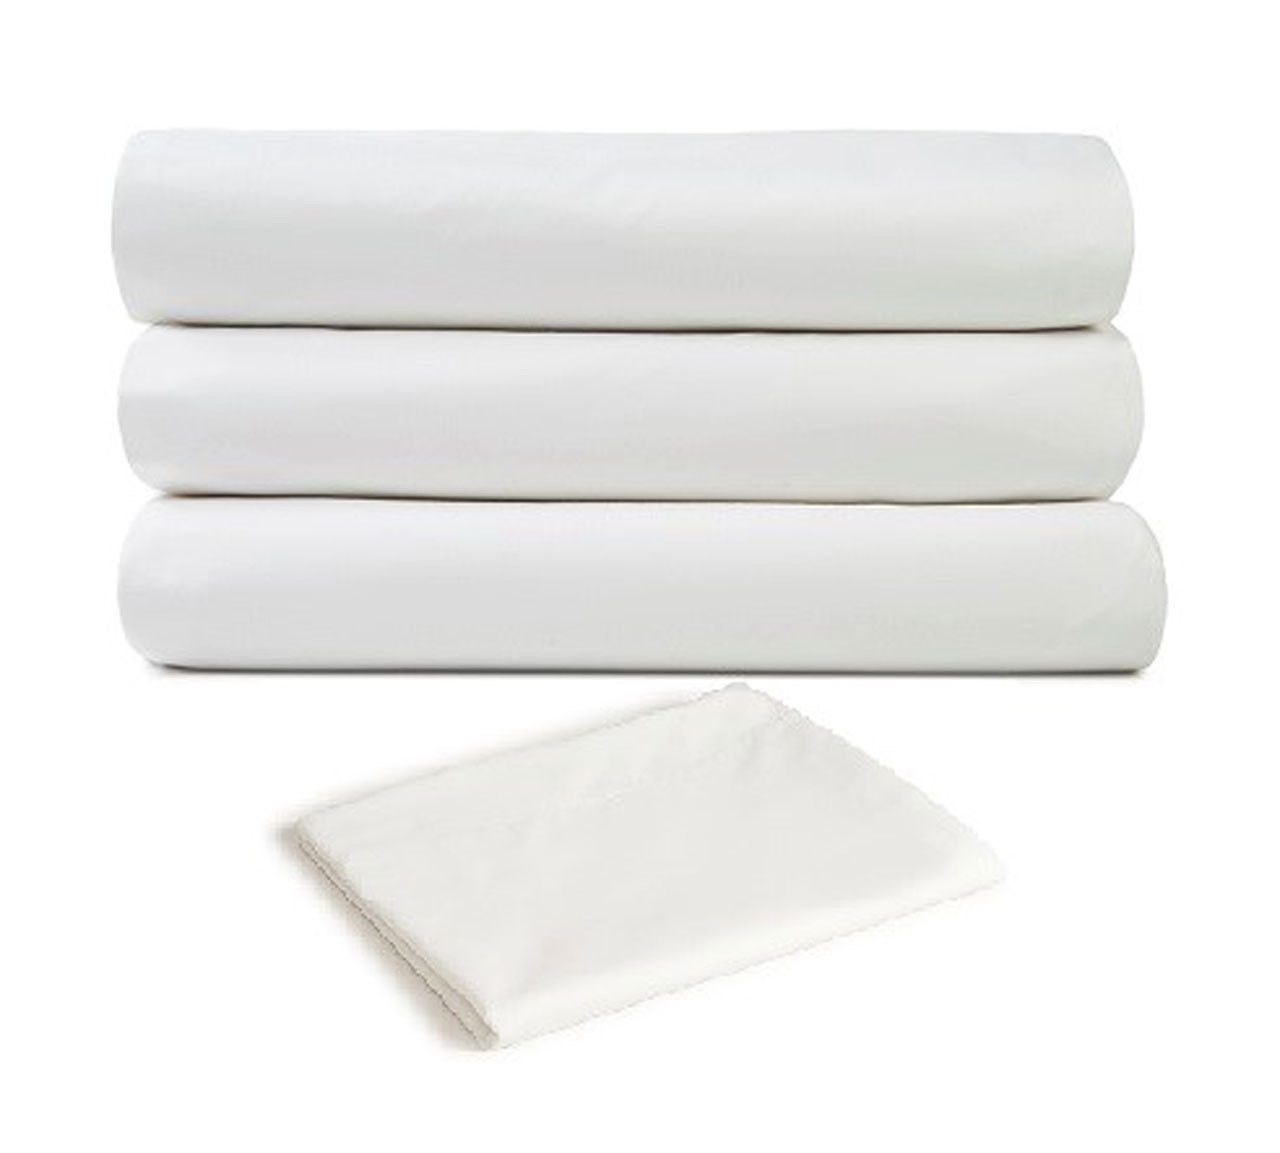 How do these 100 polyester bed sheets feel?